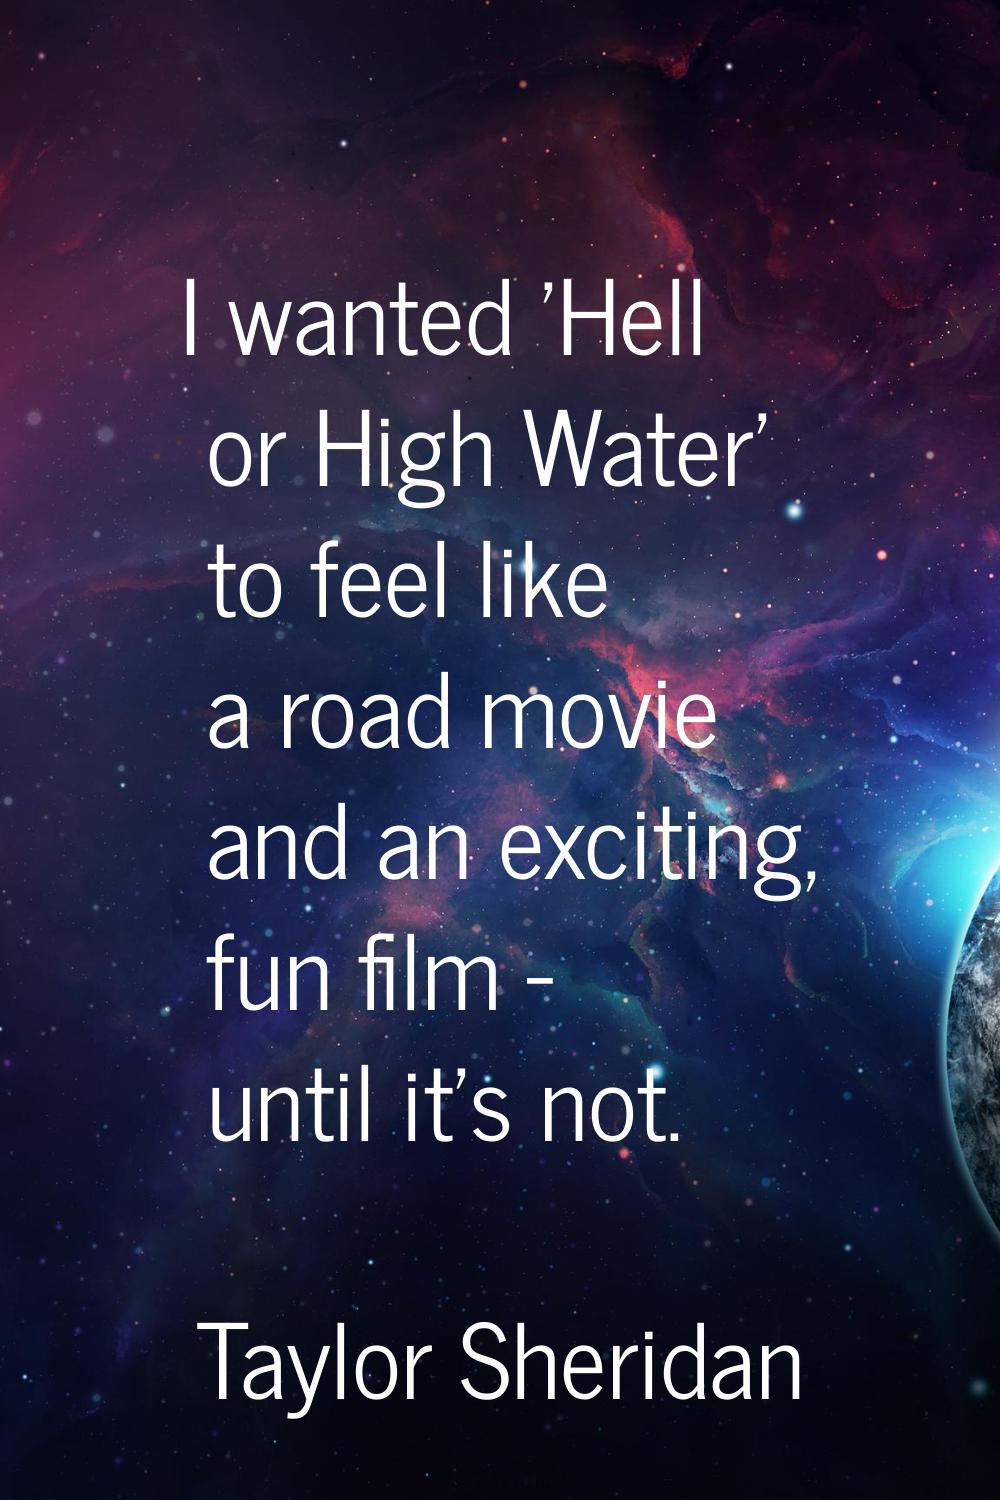 I wanted 'Hell or High Water' to feel like a road movie and an exciting, fun film - until it's not.